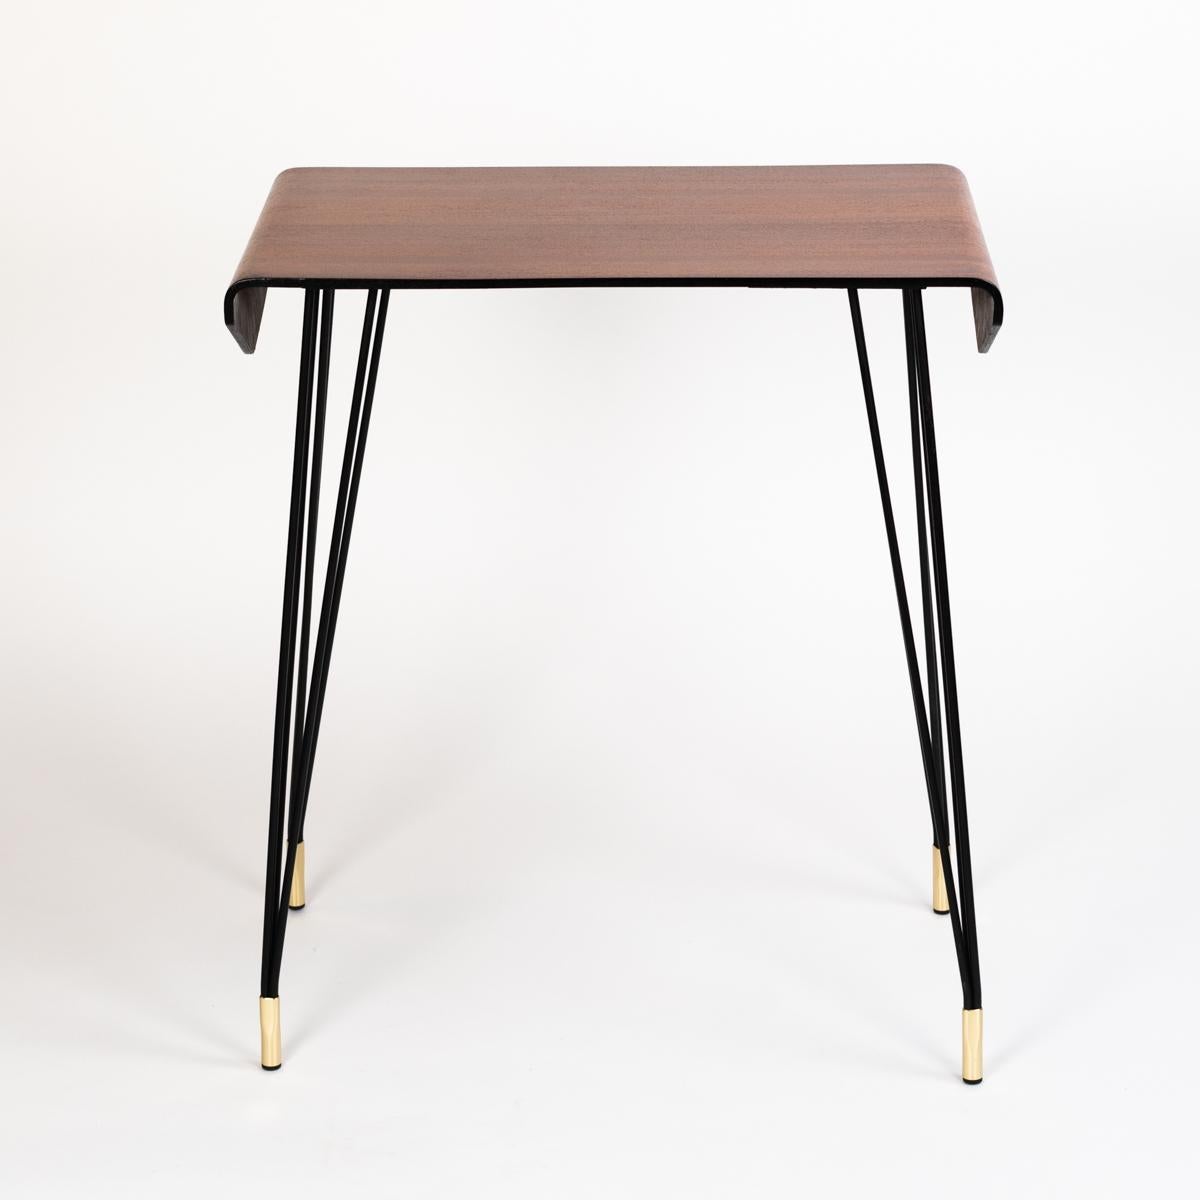 Hand-Crafted Italian Mid-Century Mahogany Desk - Console - Table Iron Legs, Brass Caps 1960s For Sale